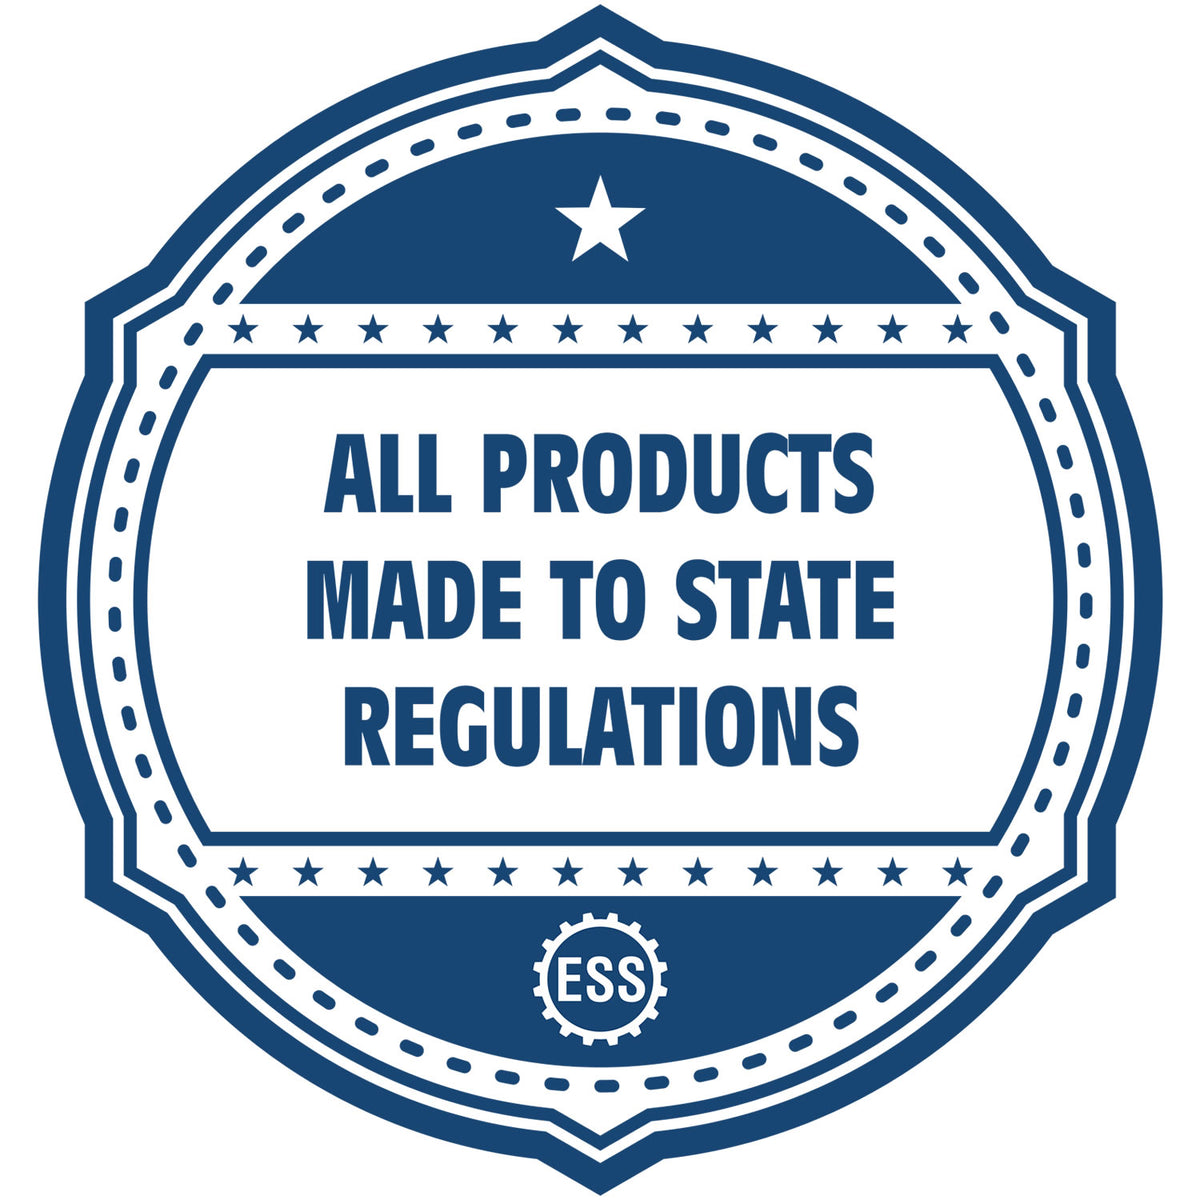 A blue icon or badge for the Heavy Duty Cast Iron Maine Geologist Seal Embosser showing that this product is made in compliance with state regulations.